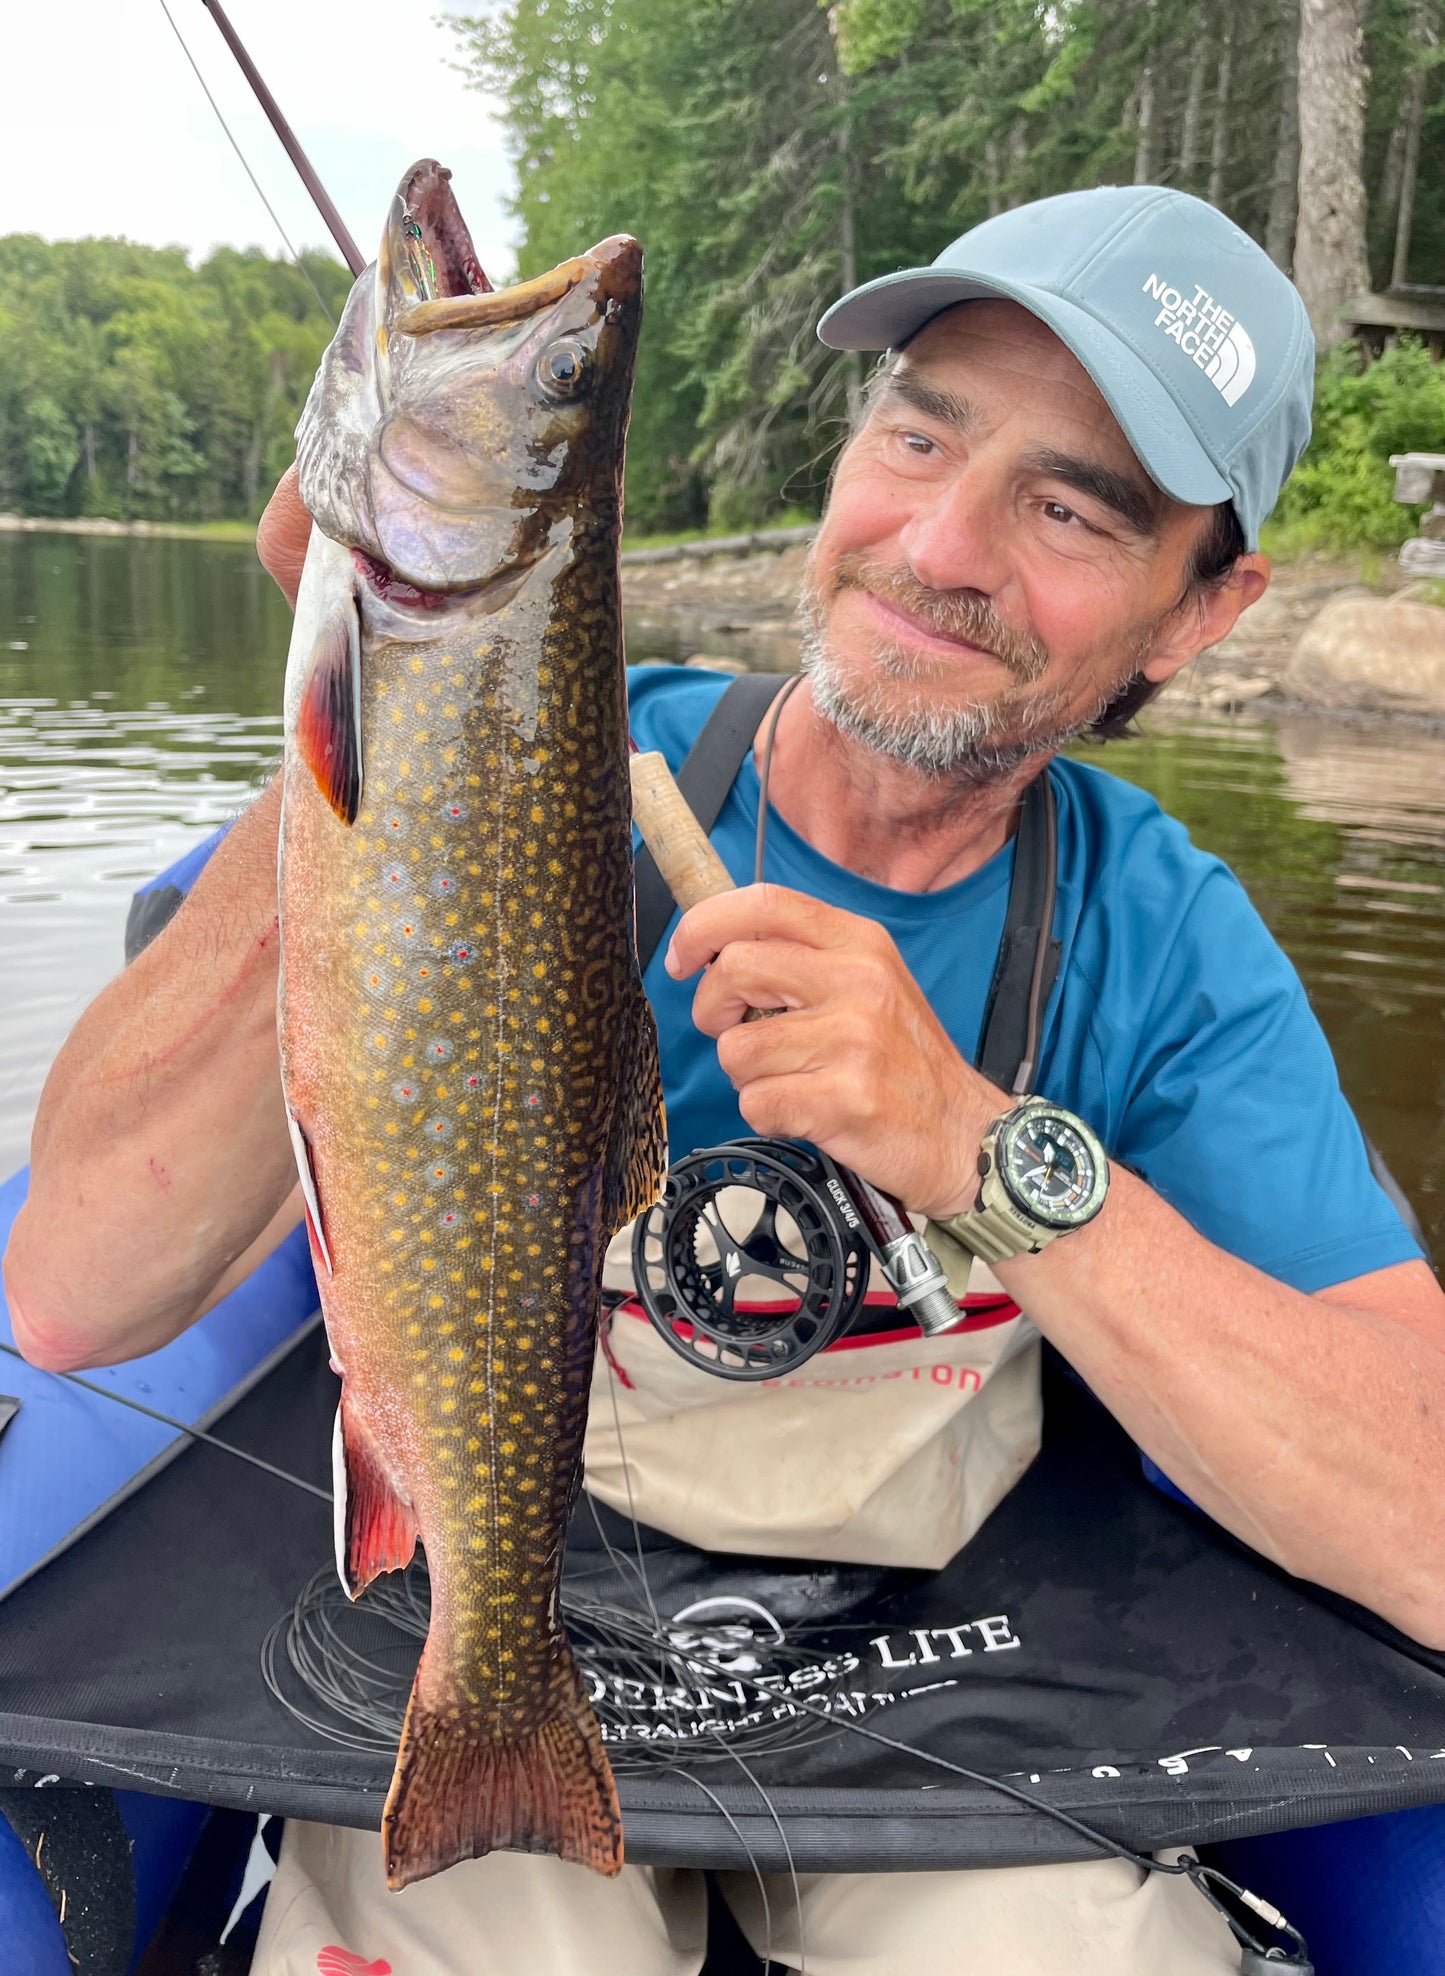 The Backpacker Pro ultralight float tube enables backcountry anglers to cover all the water of remote lakes rather than being stuck on shore.  Access to all the lake provides access to trophy size fish such as the brook trout in the picture.